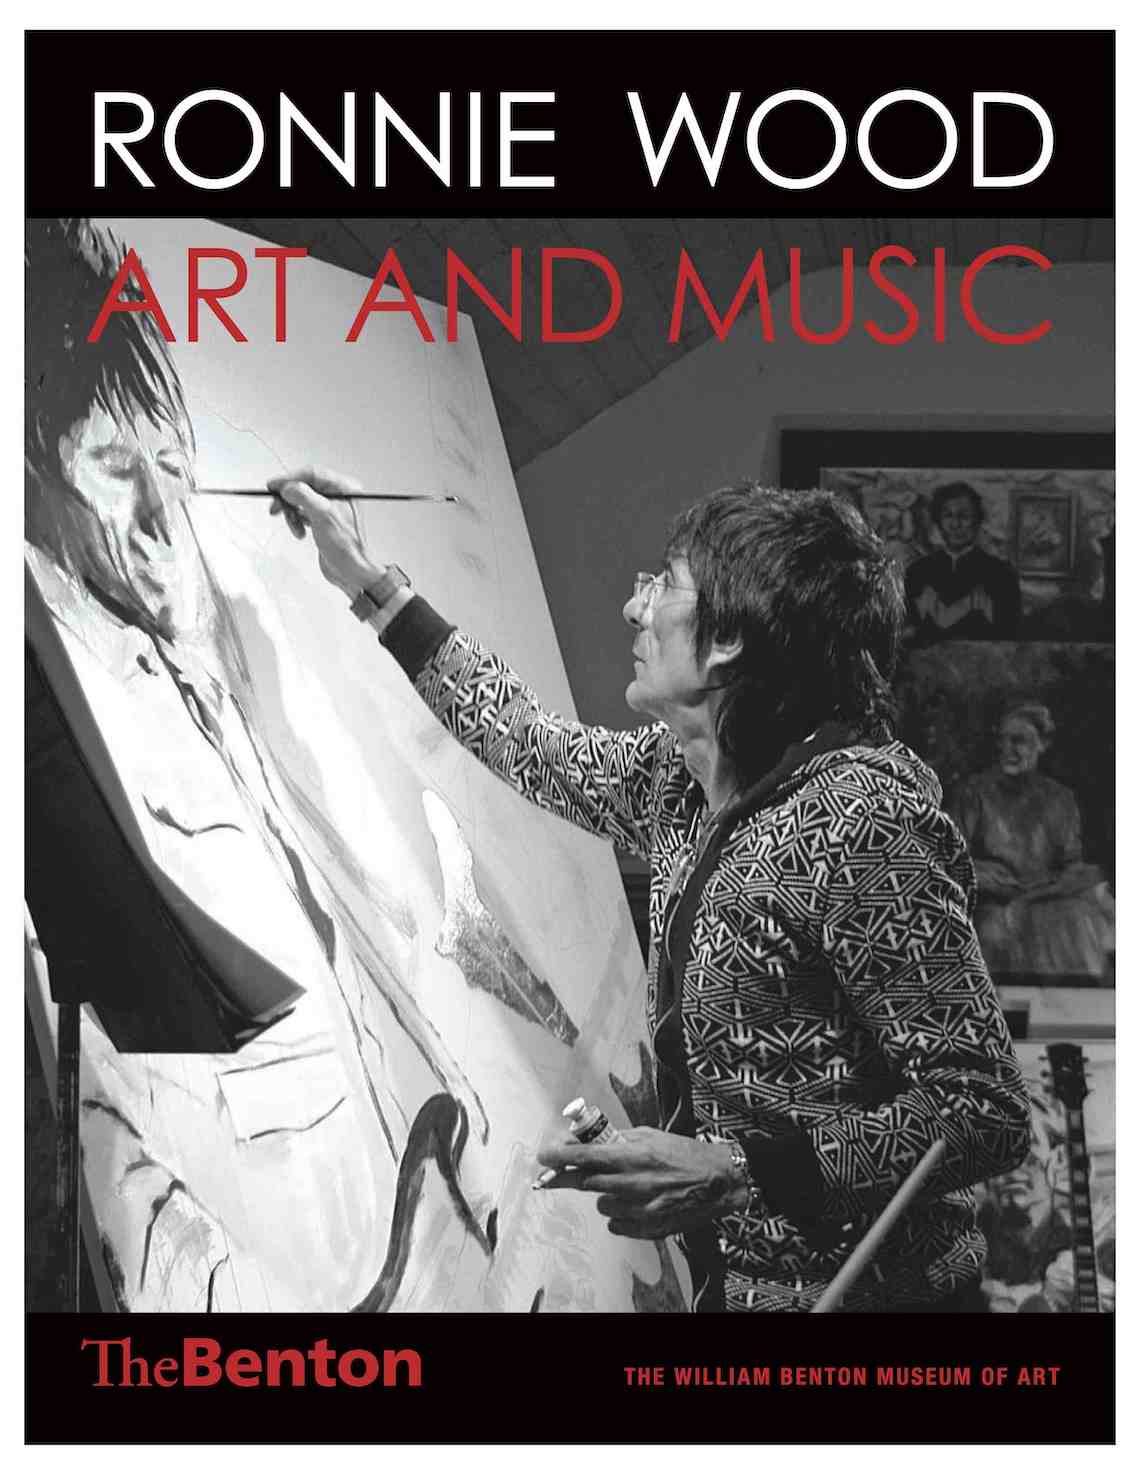 Ronnie Wood, Art and Music